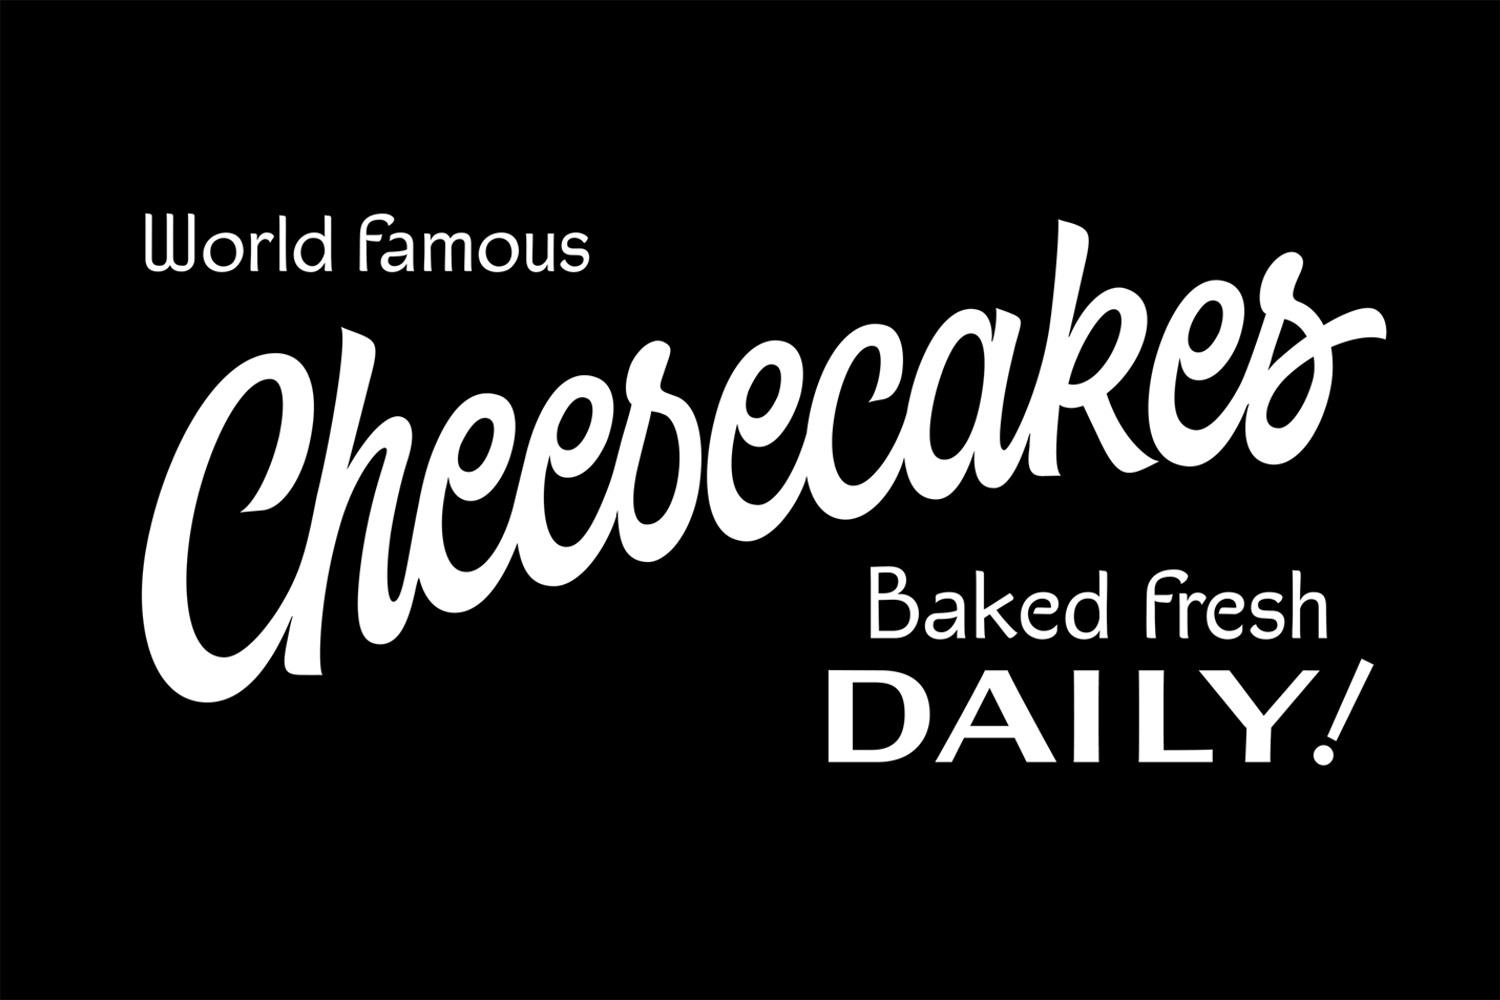 camilleweber_lettering_PieceofCake_Cheesecakes_noir.png